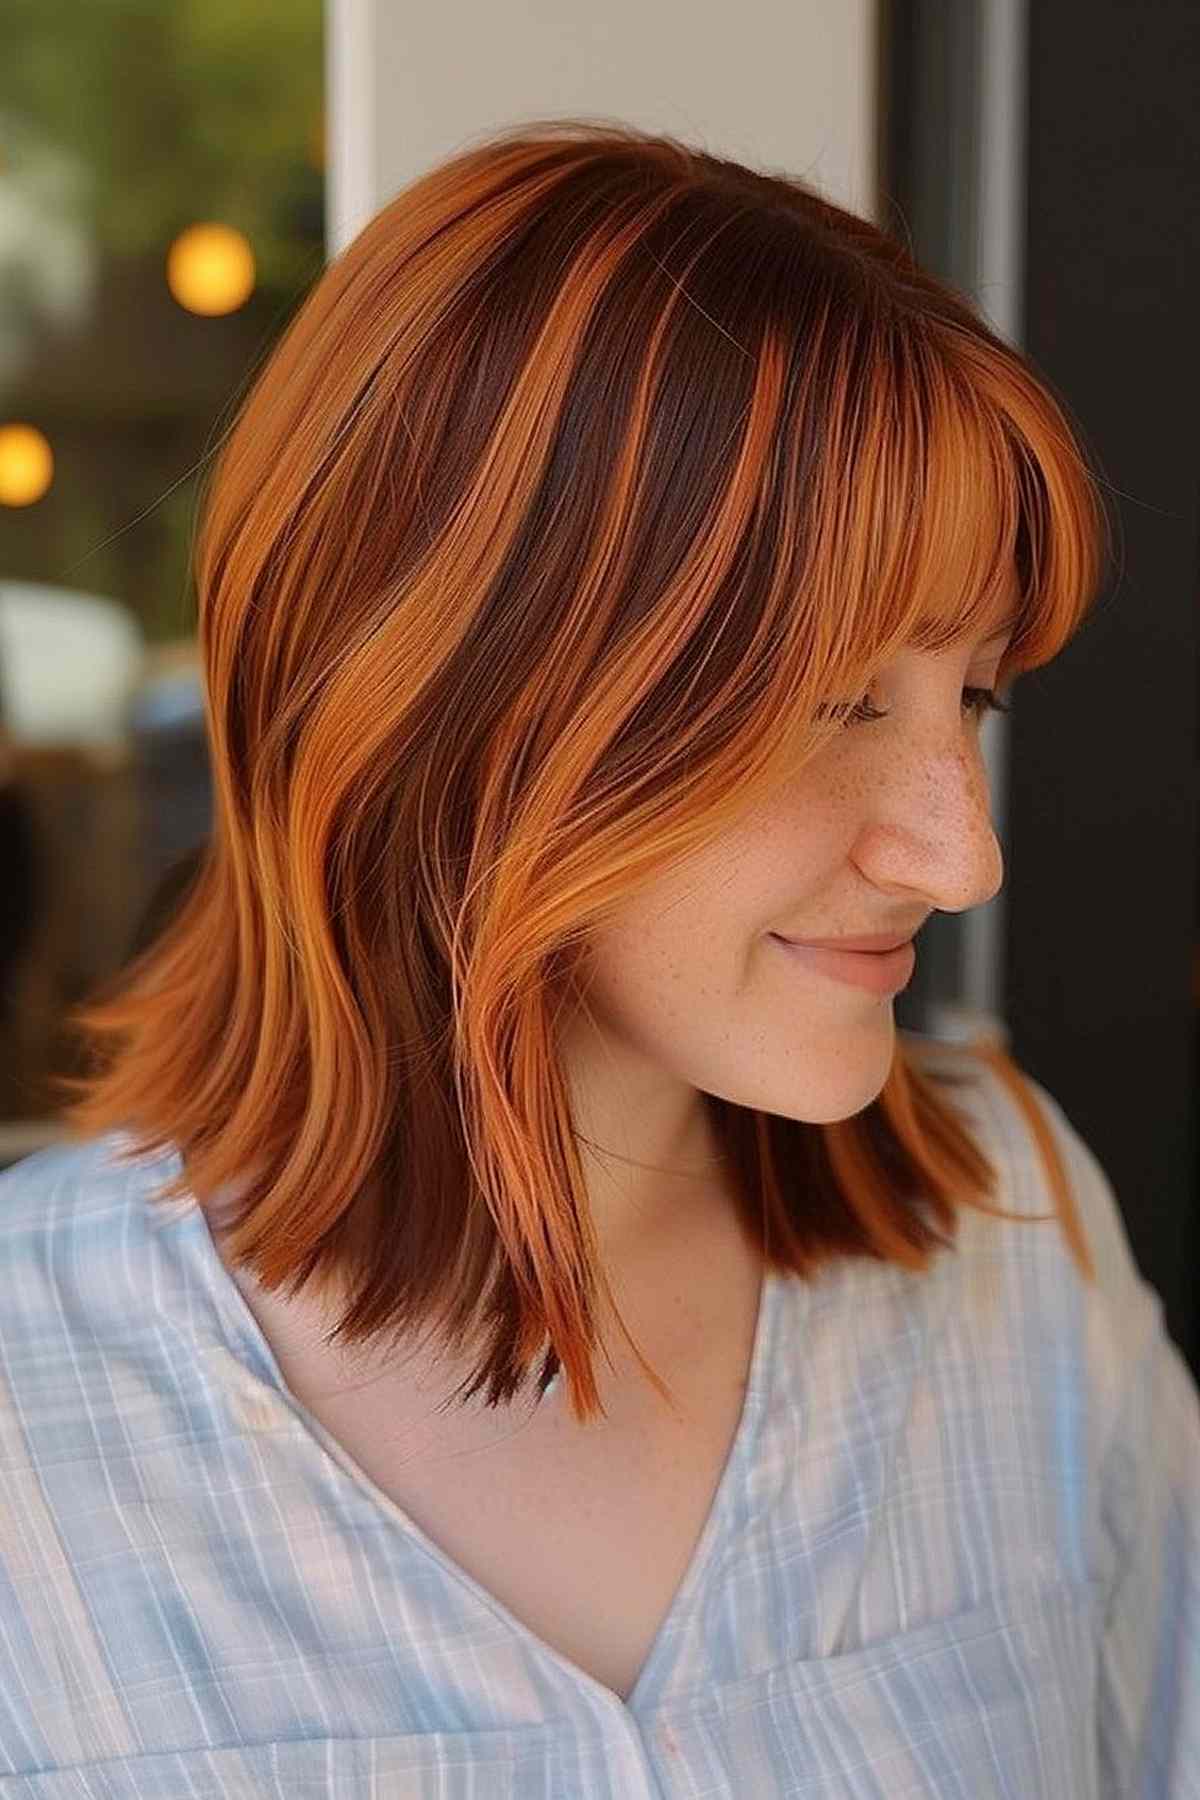 Shoulder-length auburn hair with chunky blonde highlights and blunt bangs